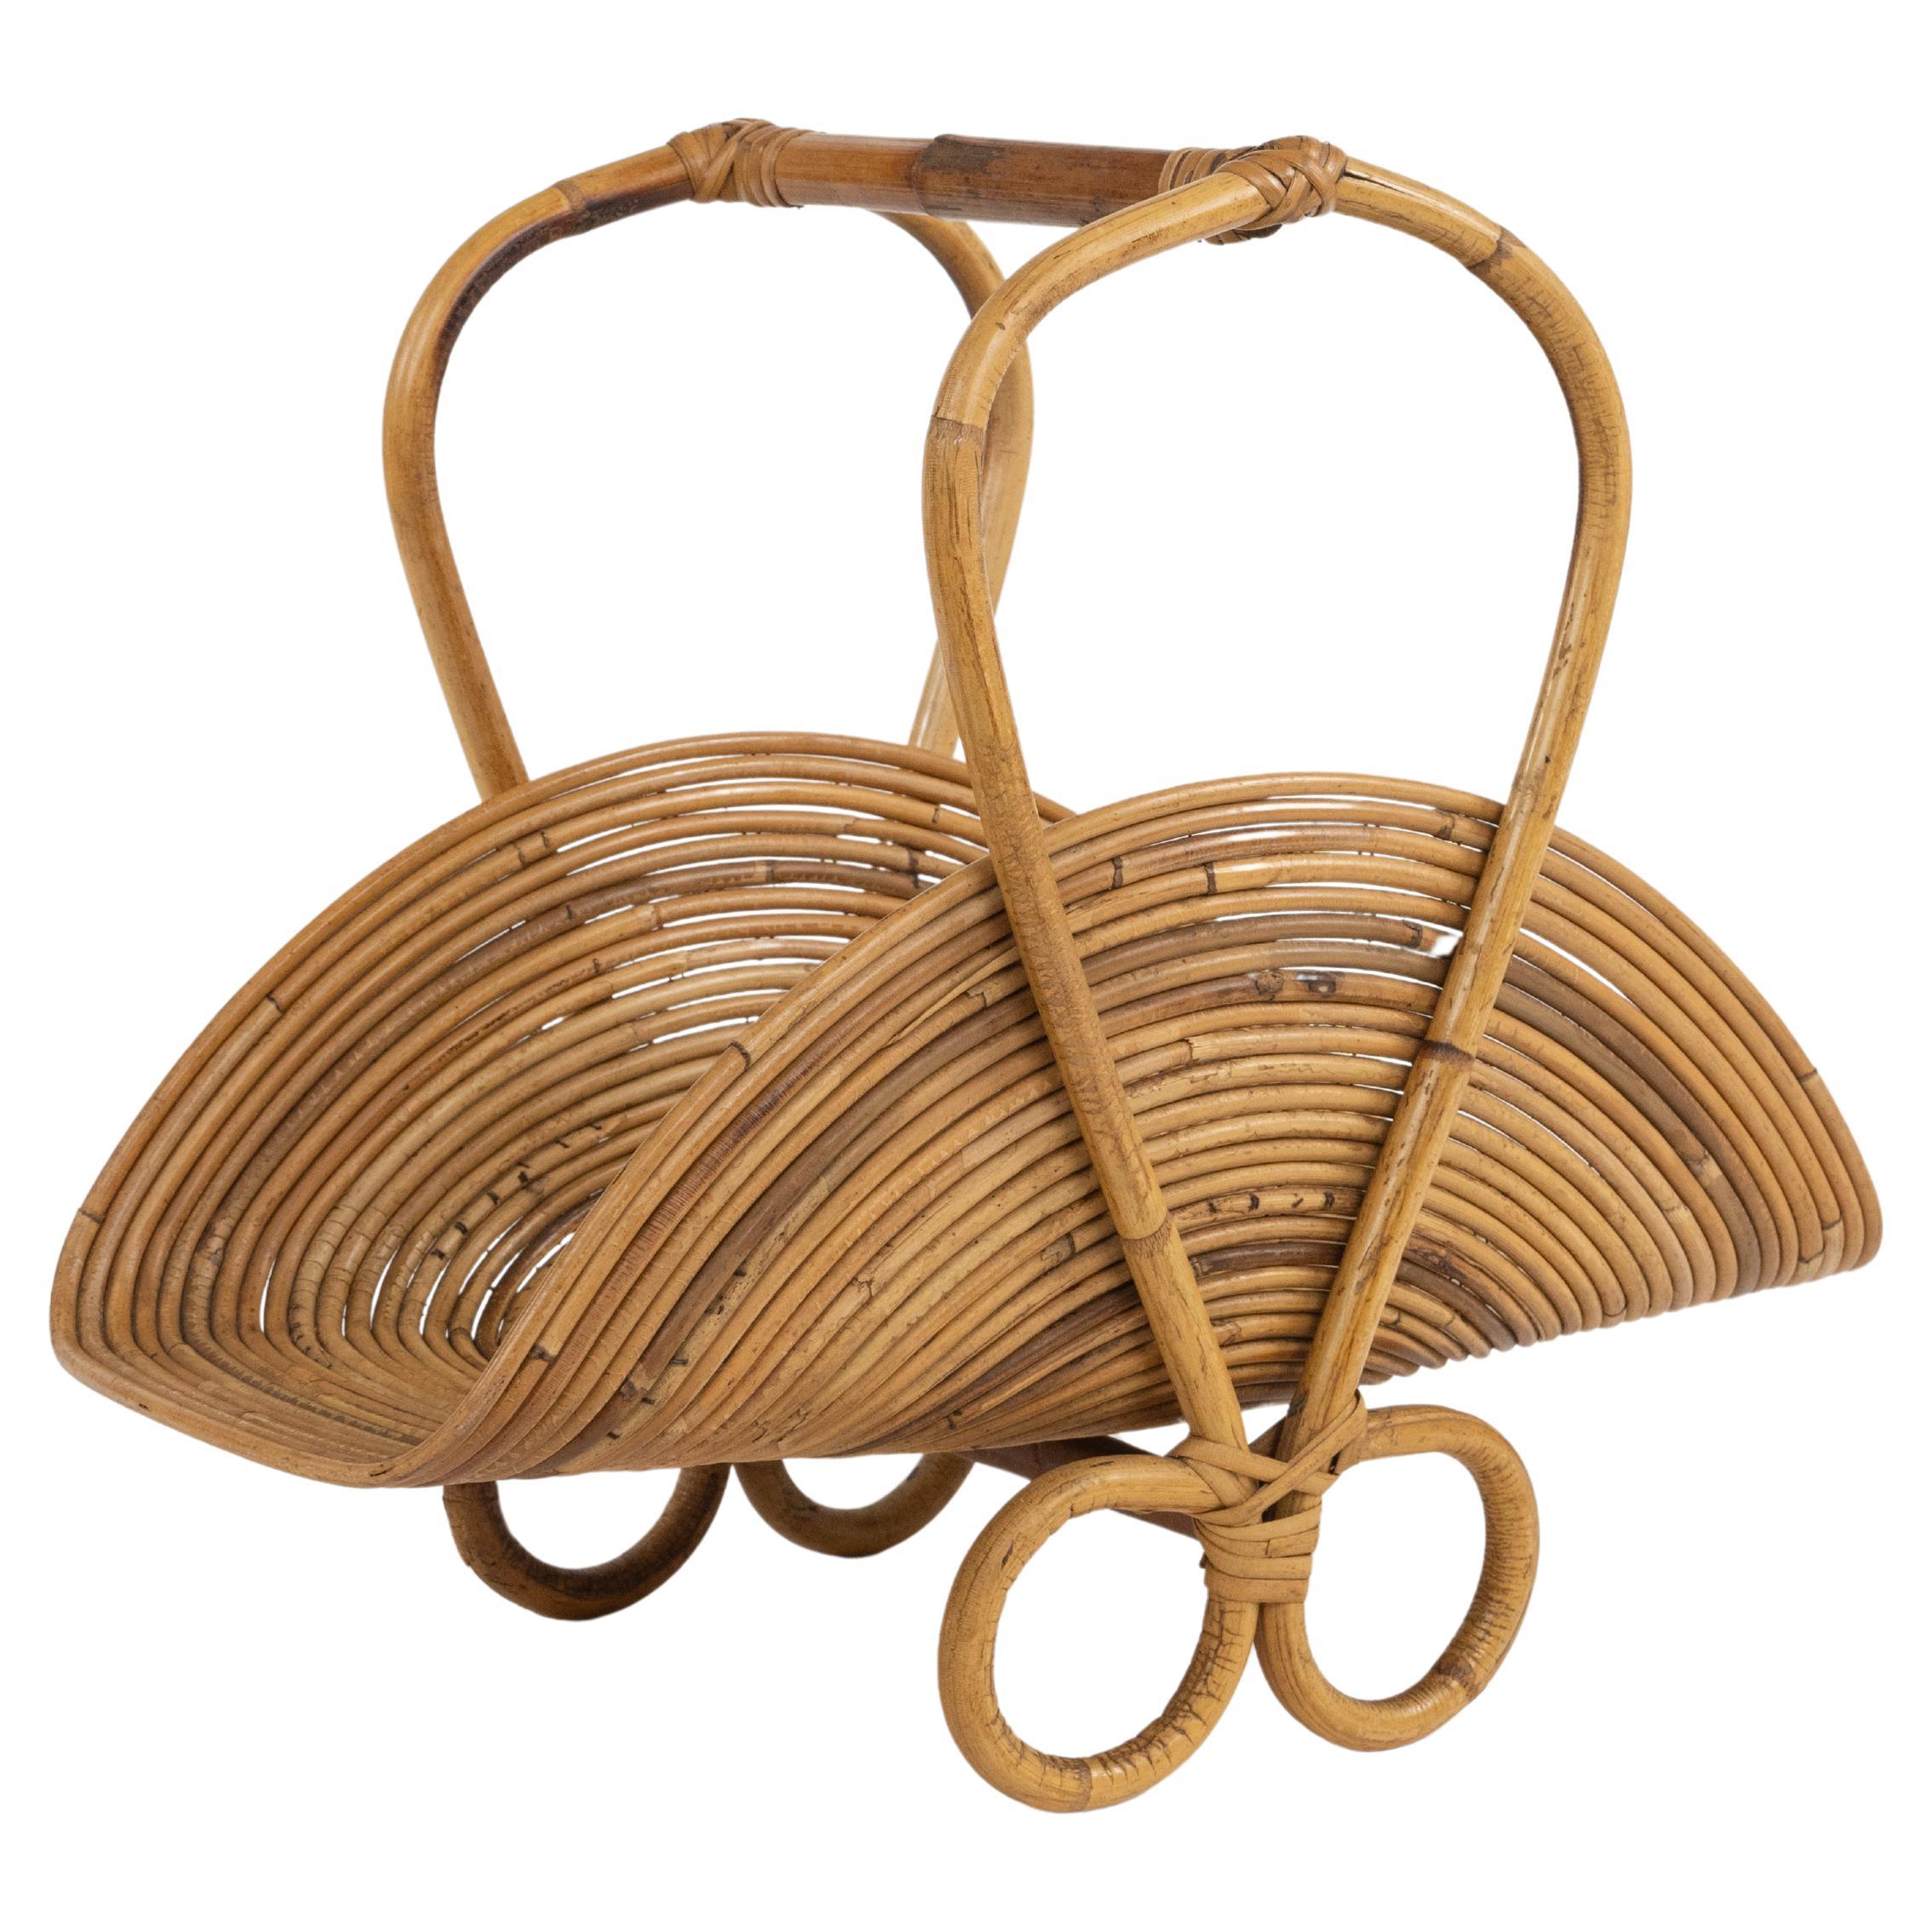 Midcentury Bamboo and Rattan Magazine Rack Vivai Del Sud Style, Italy 1960s For Sale 9